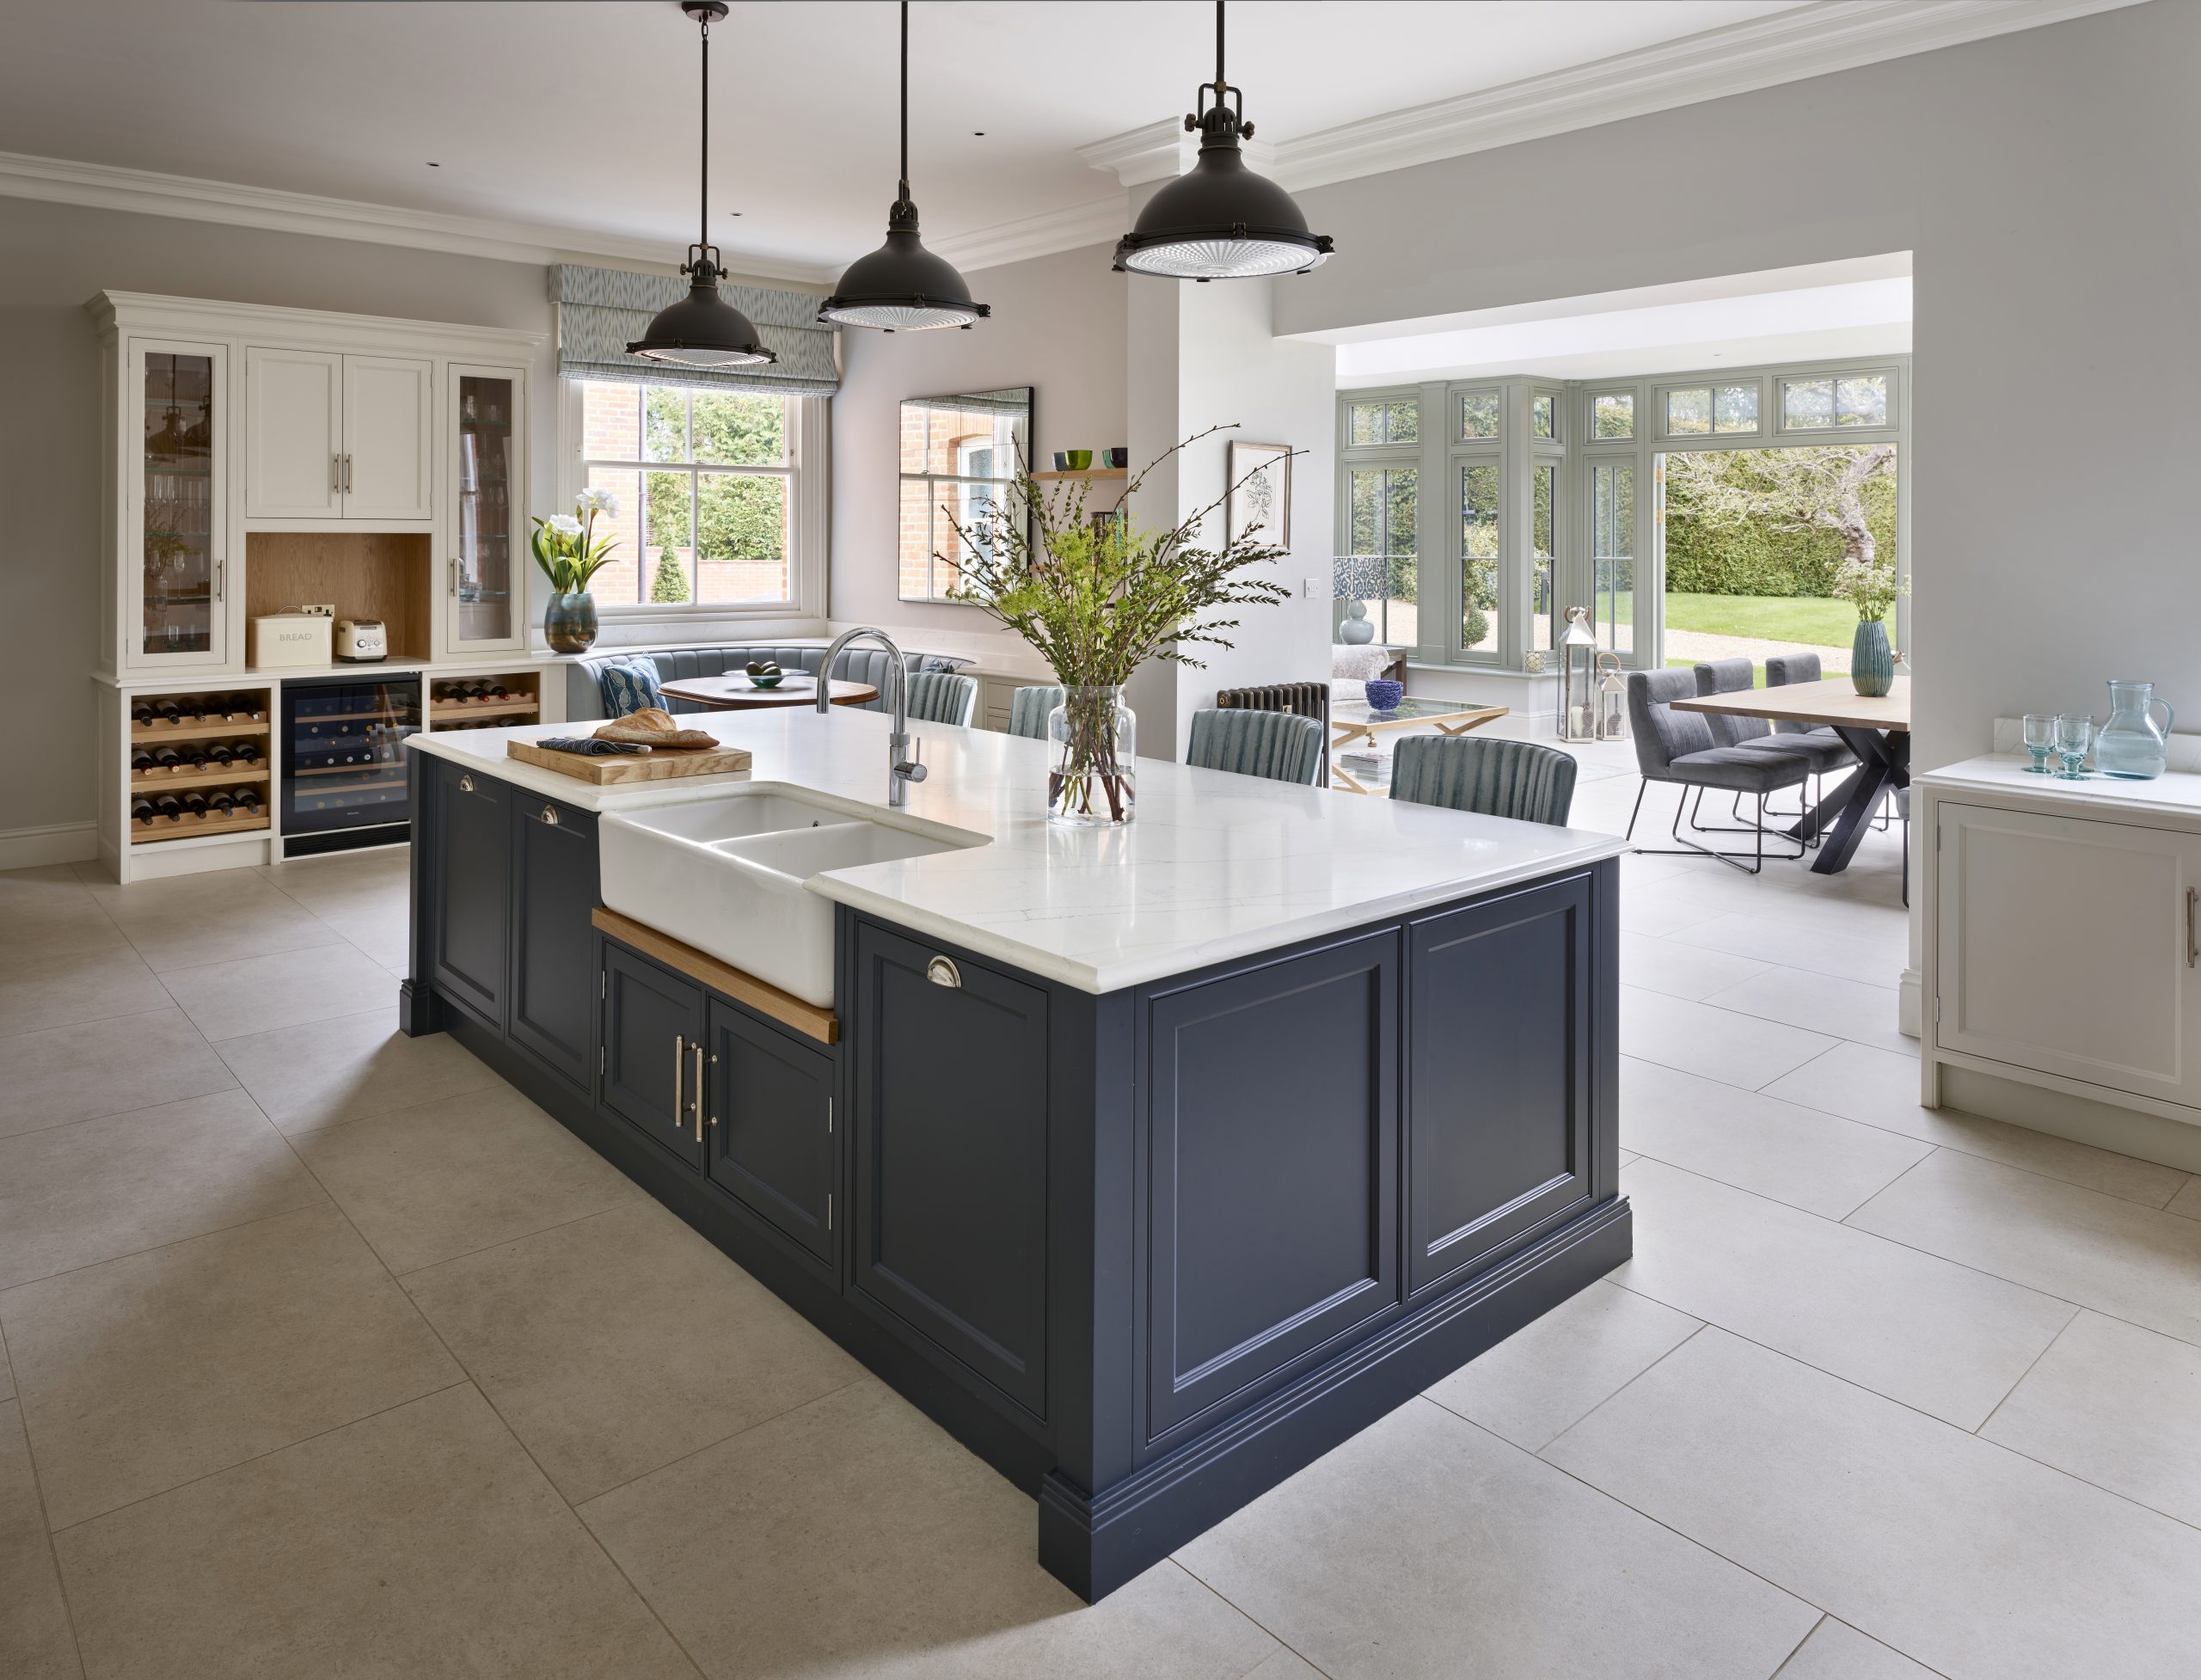 Classic luxury kitchen with large deep blue island with belfast sink and bar seating. 